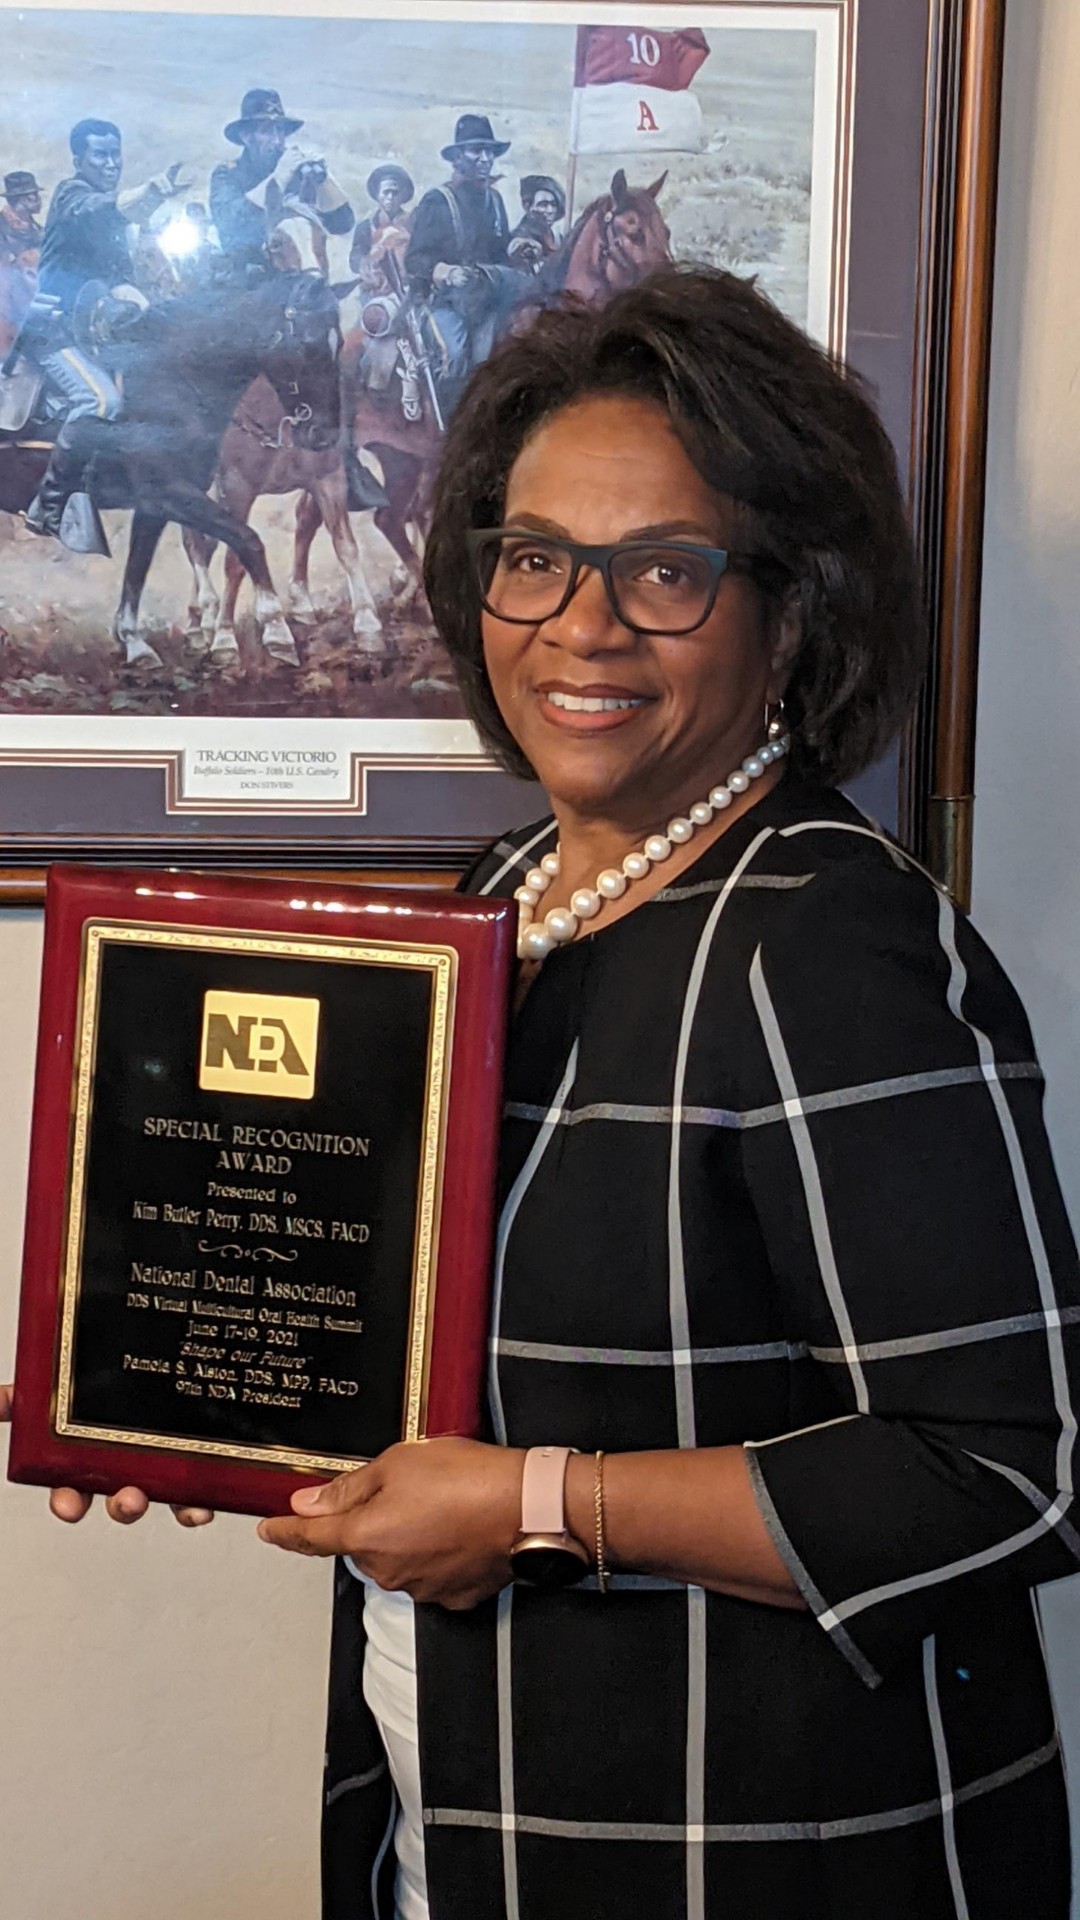 A.T. Still University's Kim Perry poses with an award from the National Dental Association